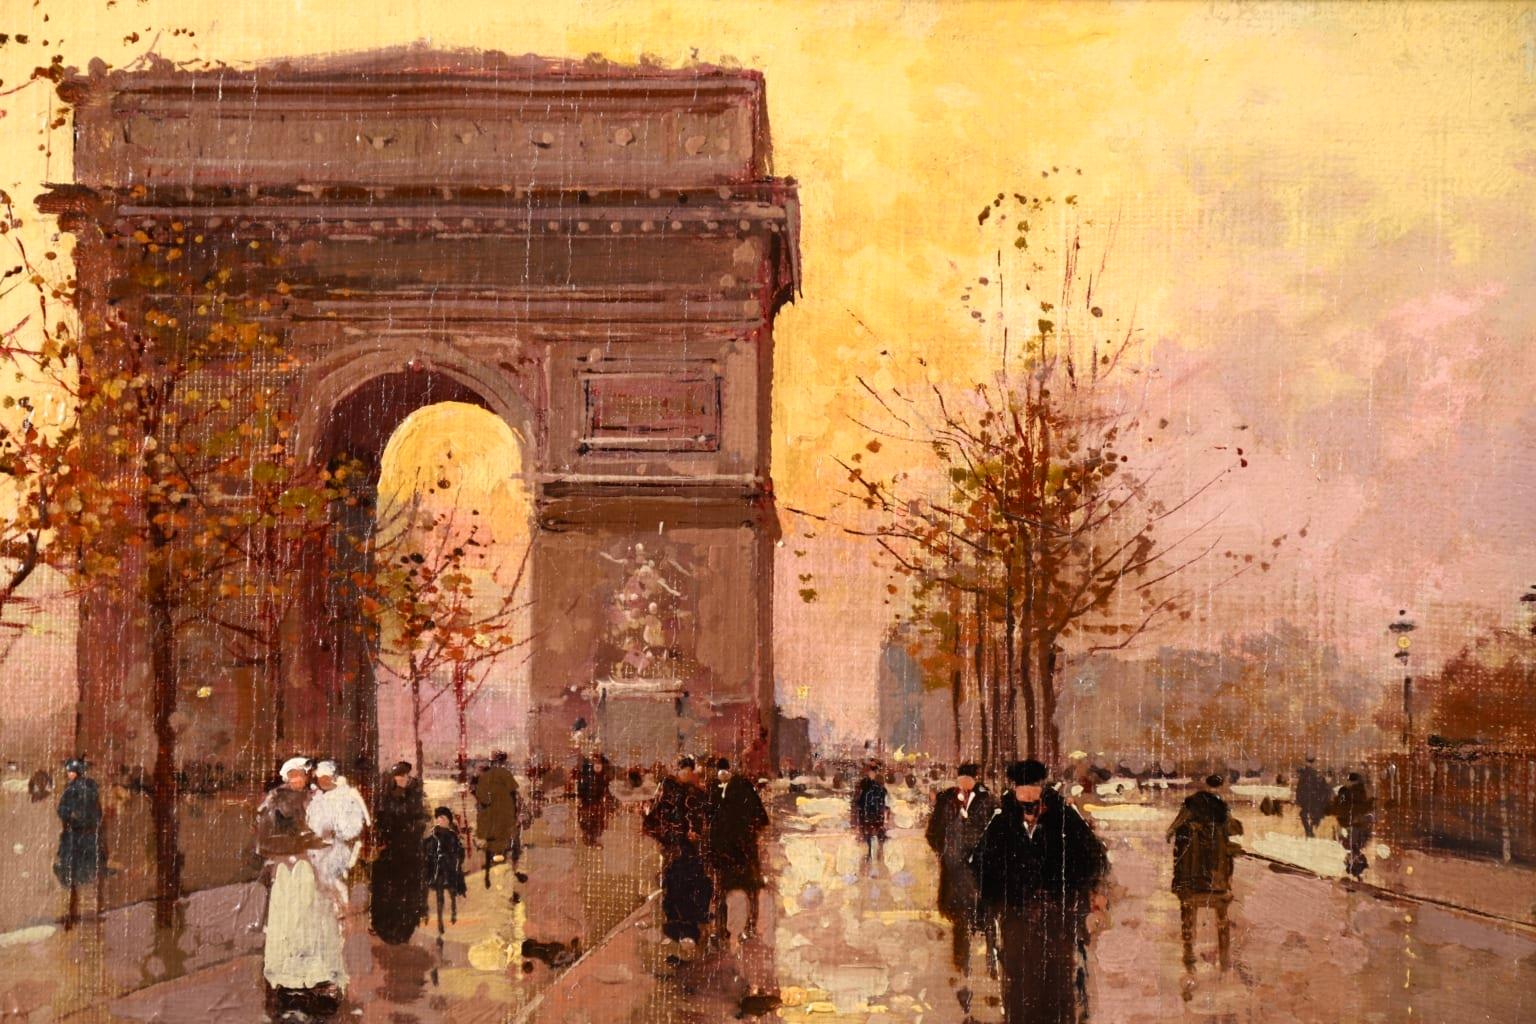 A wonderful oil on original canvas circa 1930 by sought after French impressionist painter Edouard Leon Cortes depicting figures not the street by the Arc de Triomphe in Paris, France on what looks to be a cold autumn evening in the city. The sun is